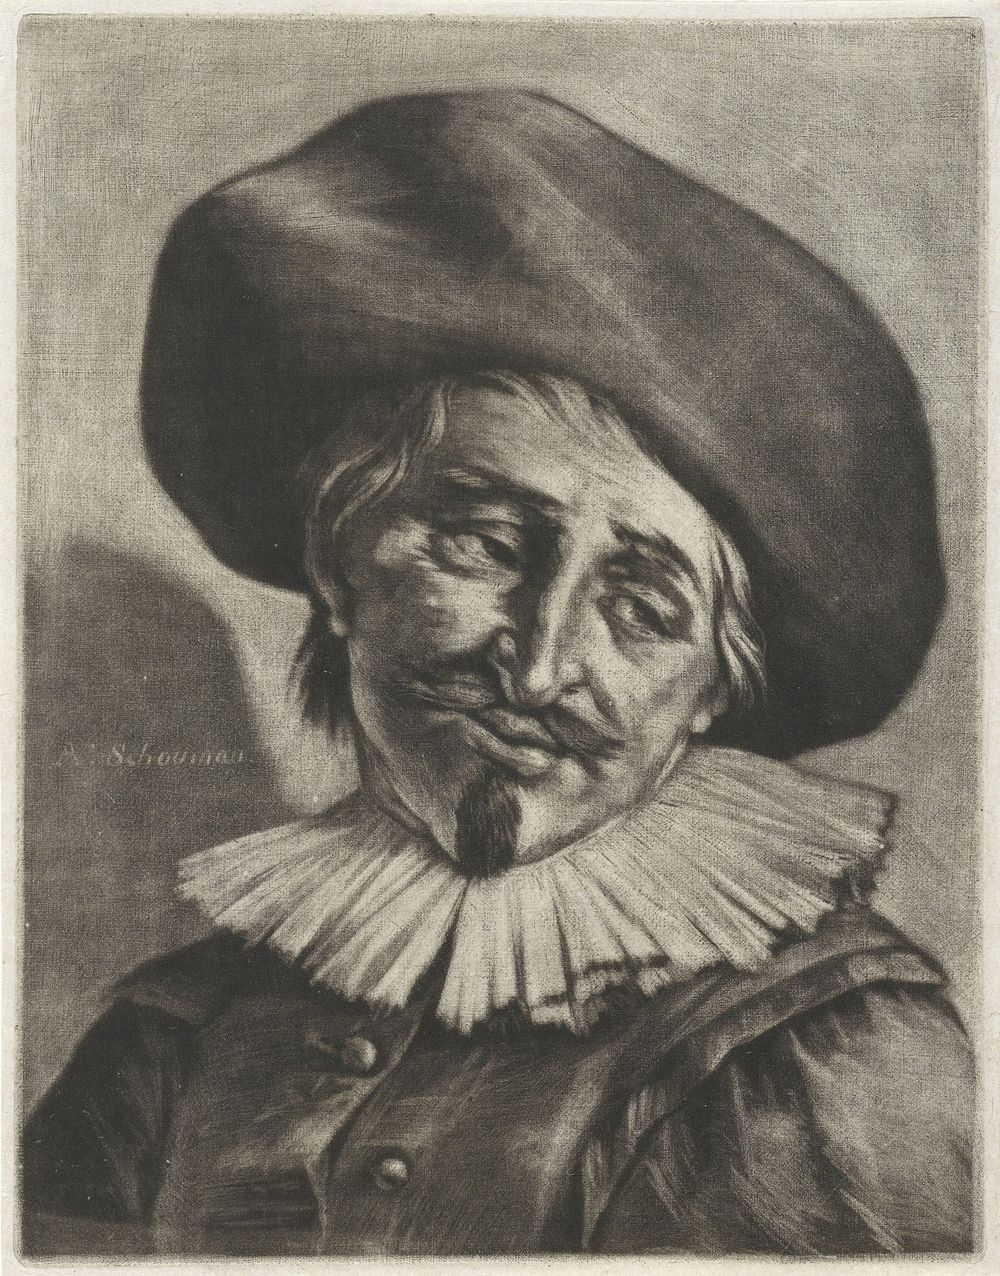 Droevige man (1720 - 1792) by Aert Schouman and Frans Hals